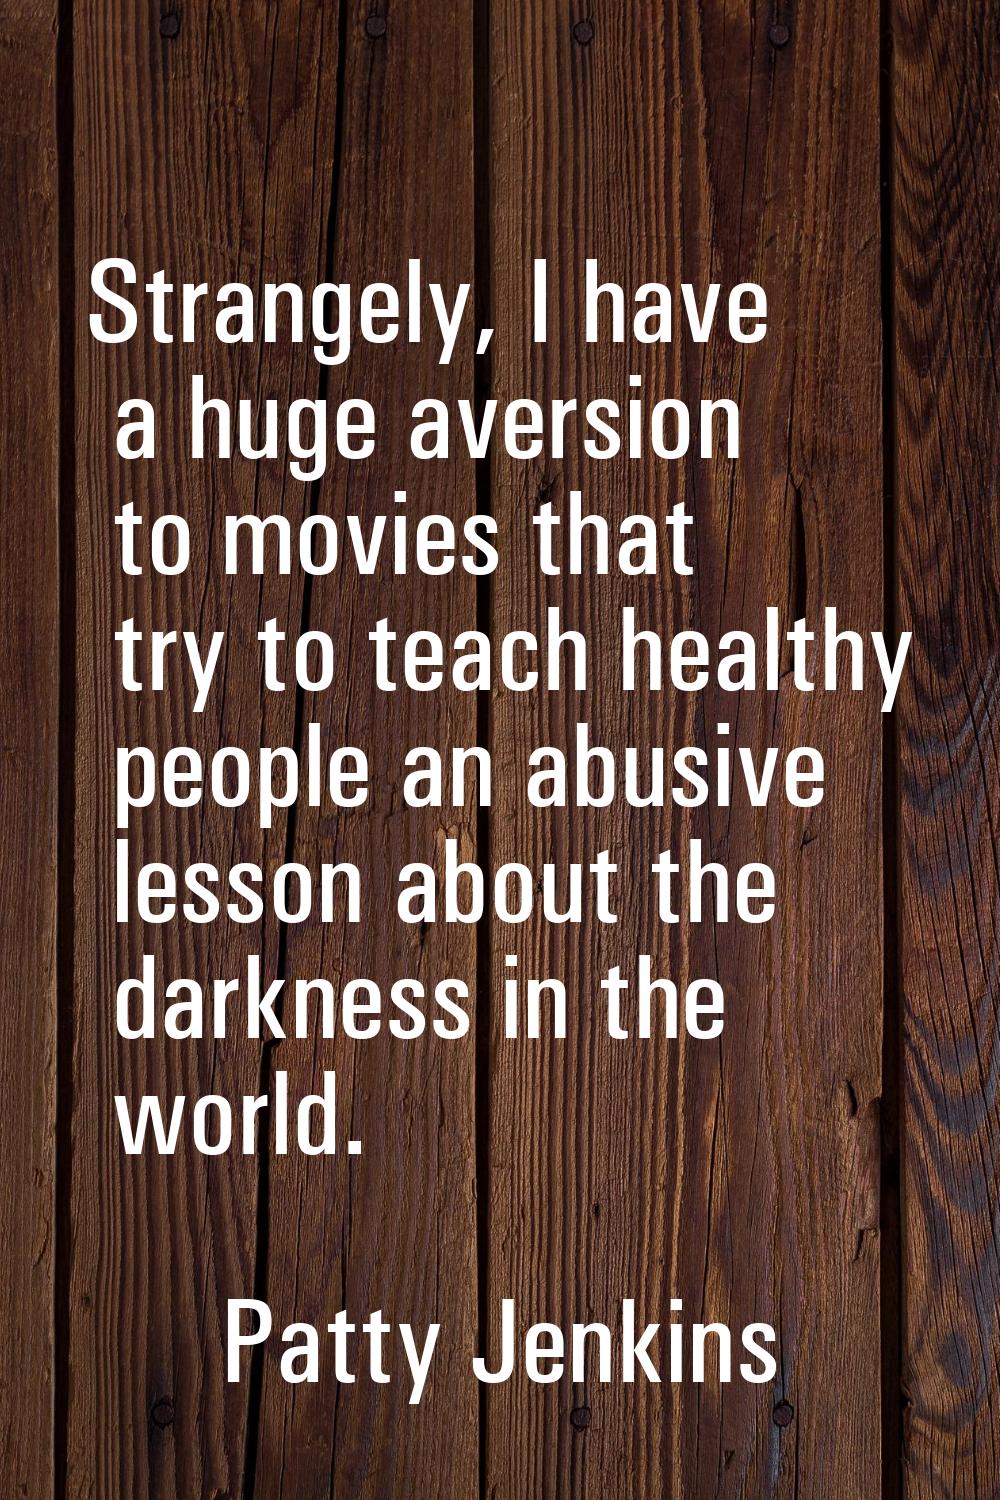 Strangely, I have a huge aversion to movies that try to teach healthy people an abusive lesson abou